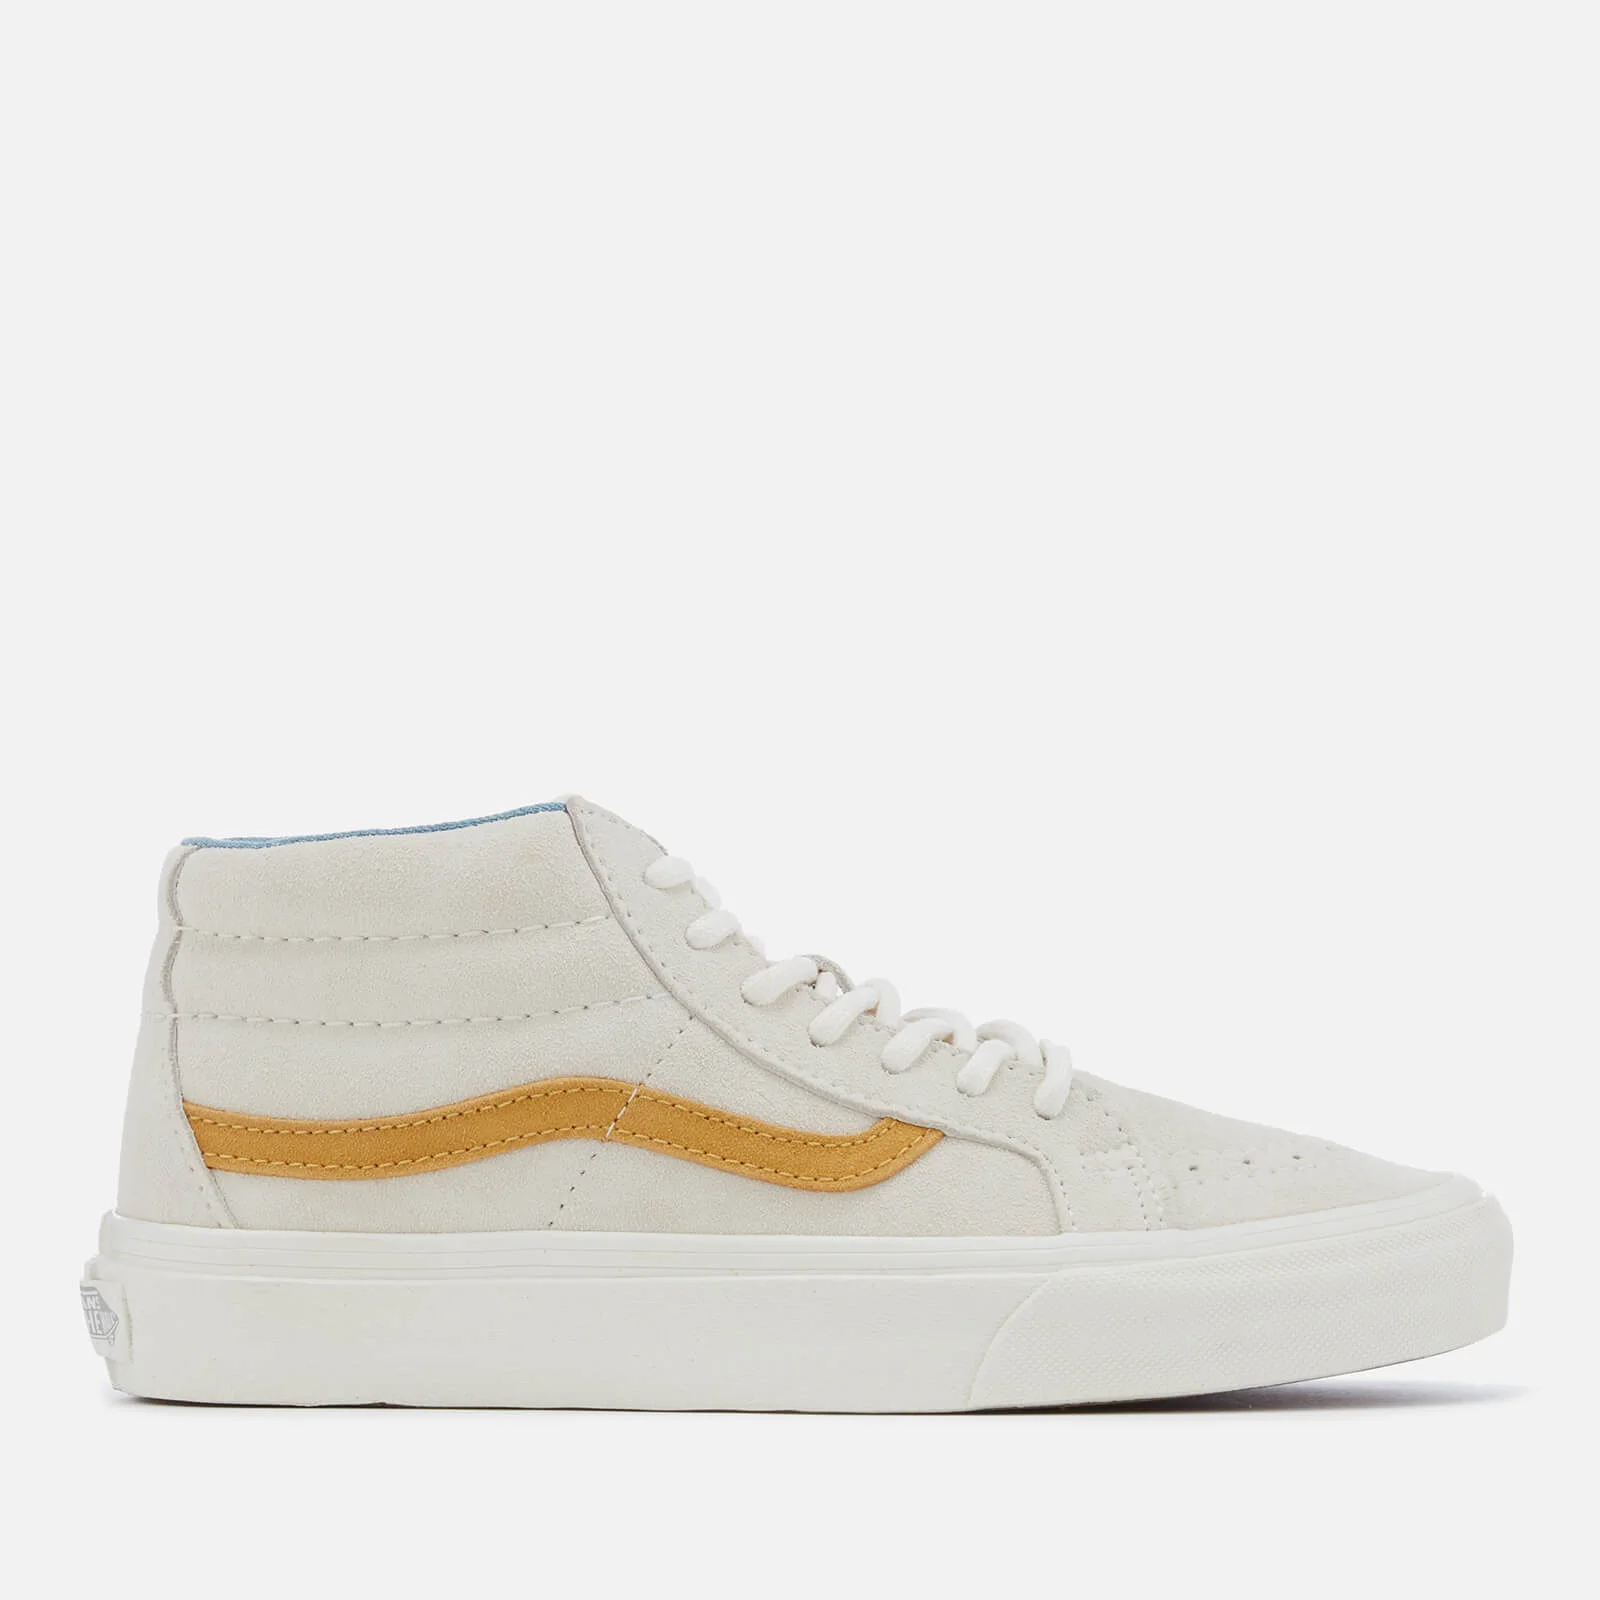 Vans Sk8-Mid Reissue Trainers - Snow White Image 1